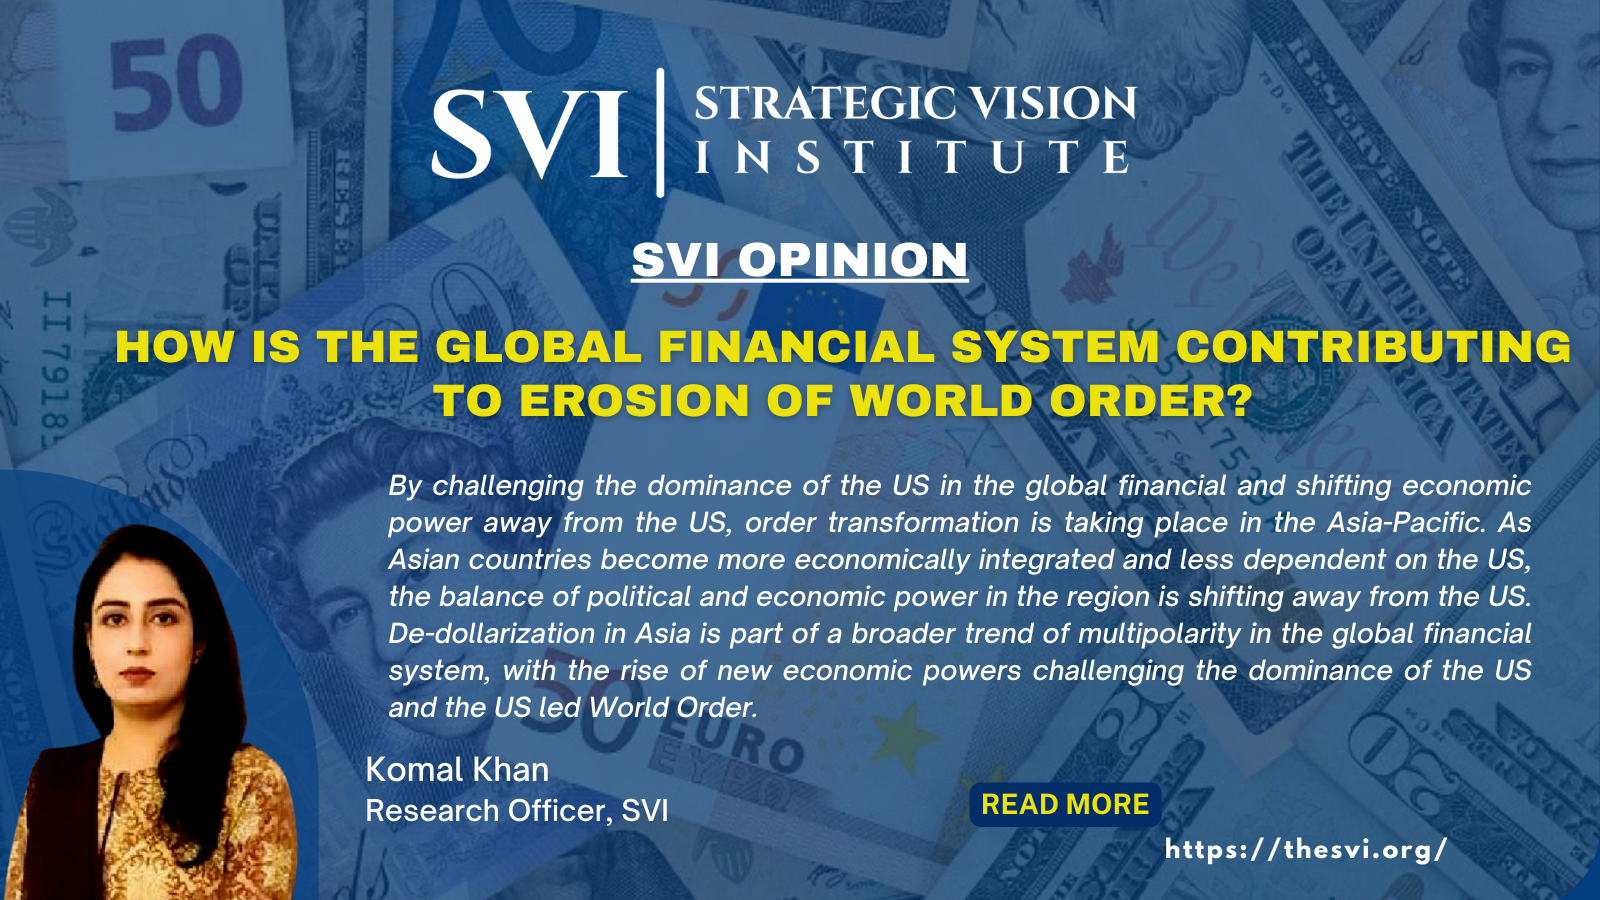 How Is The Global Financial System Contributing To Erosion Of World Order?